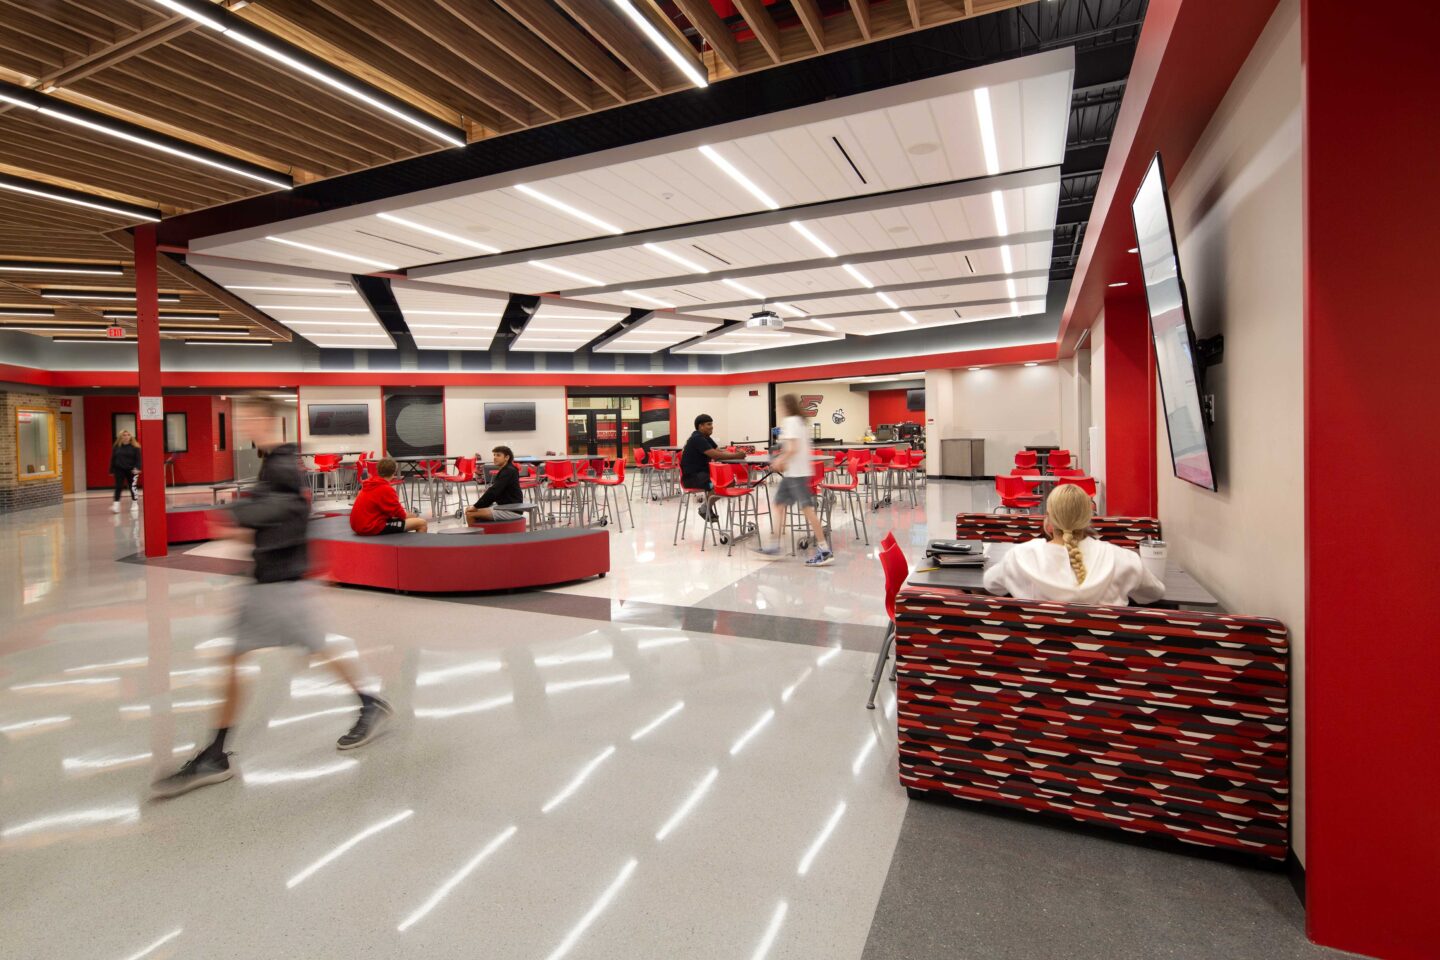 Edgerton High School Commons Area with students walking and talking